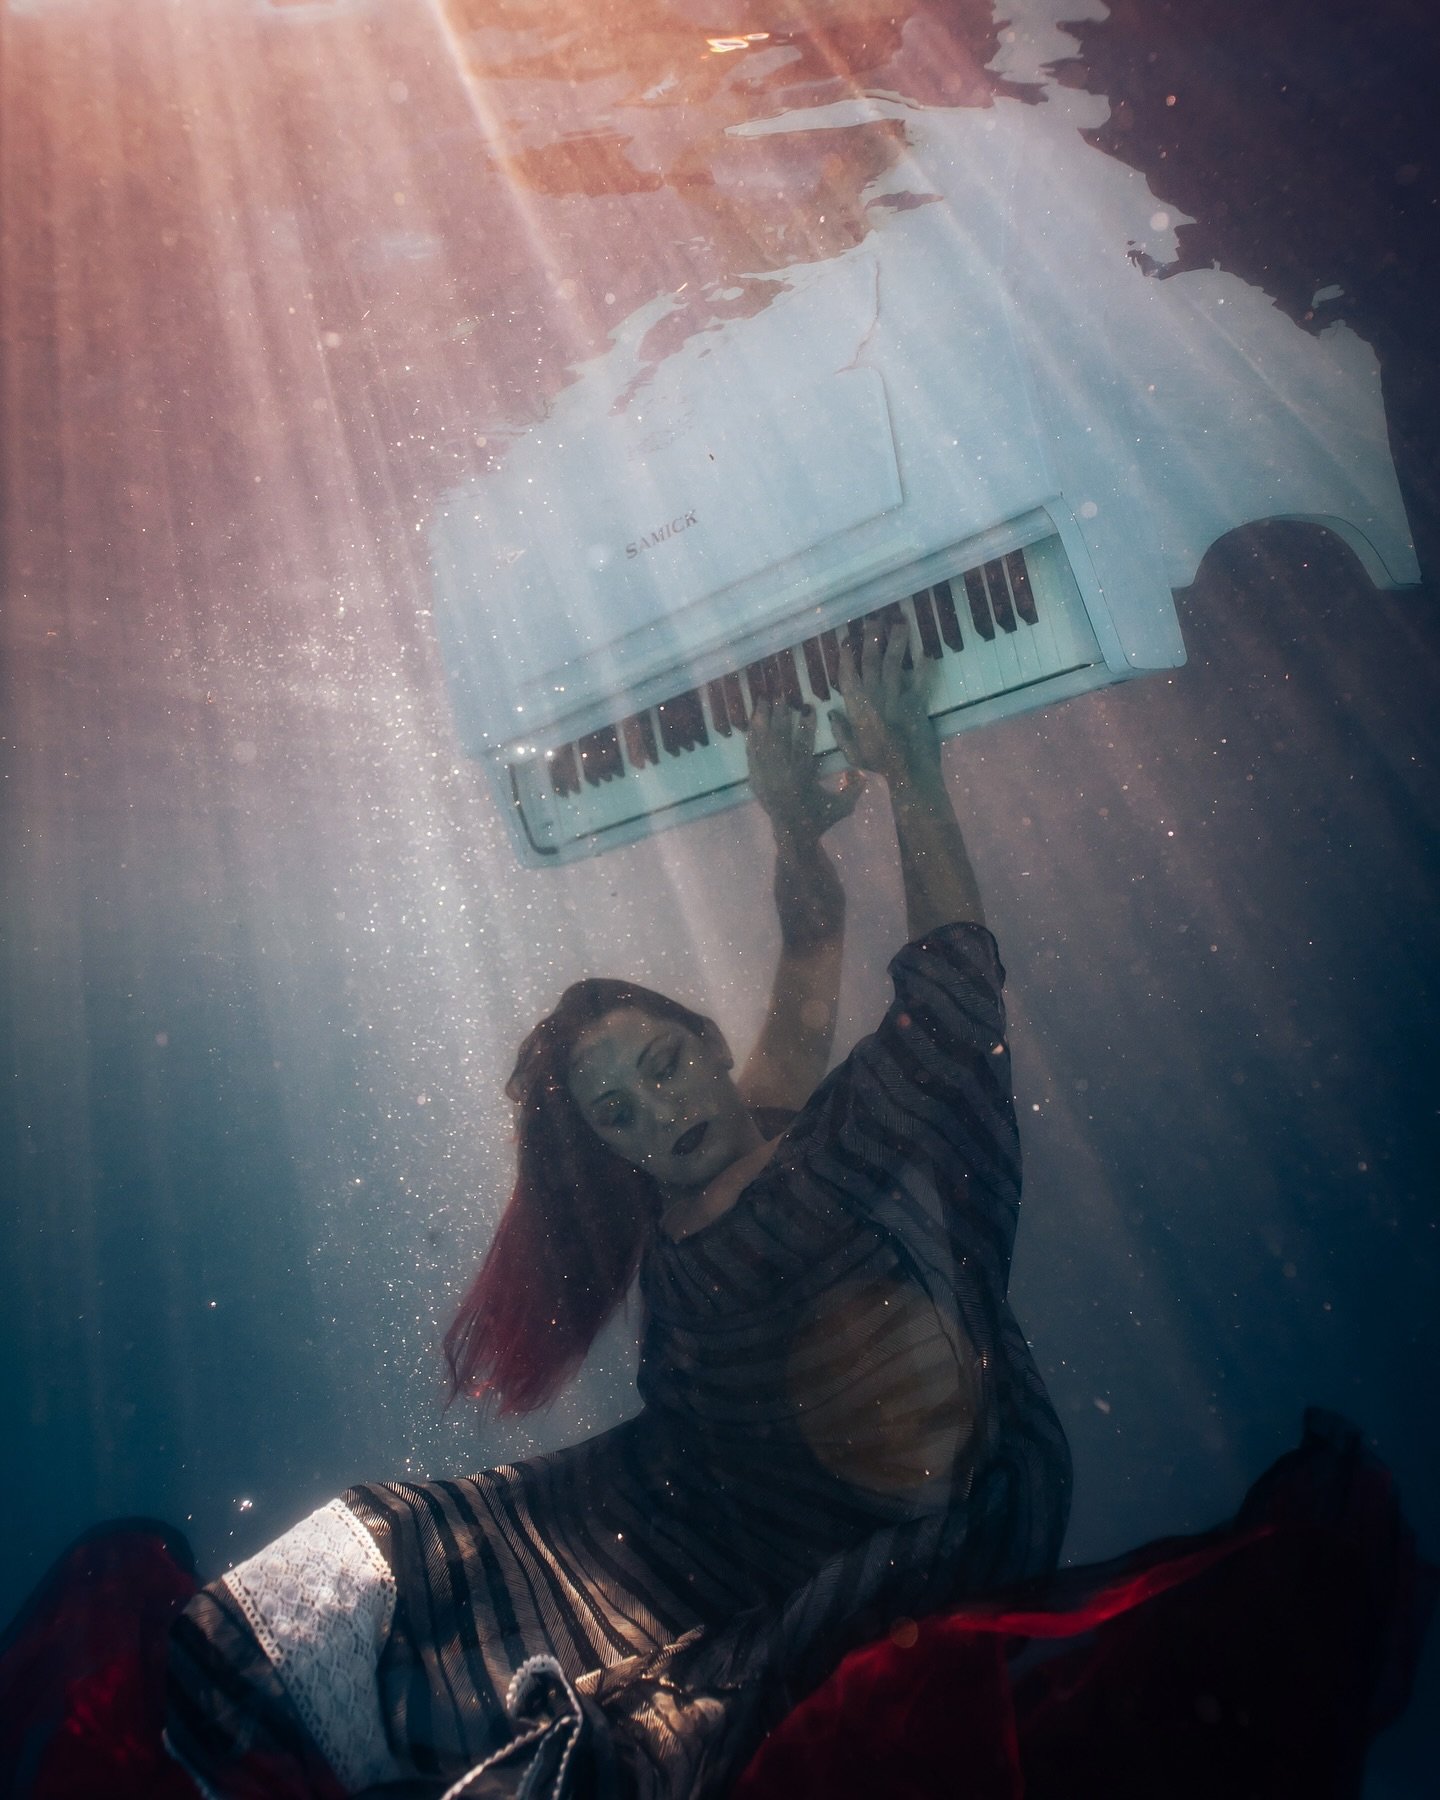 Working on my music website and came across this photo
I have such a rediscovered appreciation for it -the sunlight perfectly seeping into the water- Martha literally sending me into the deep end with the piano floating above me- the flares of light 